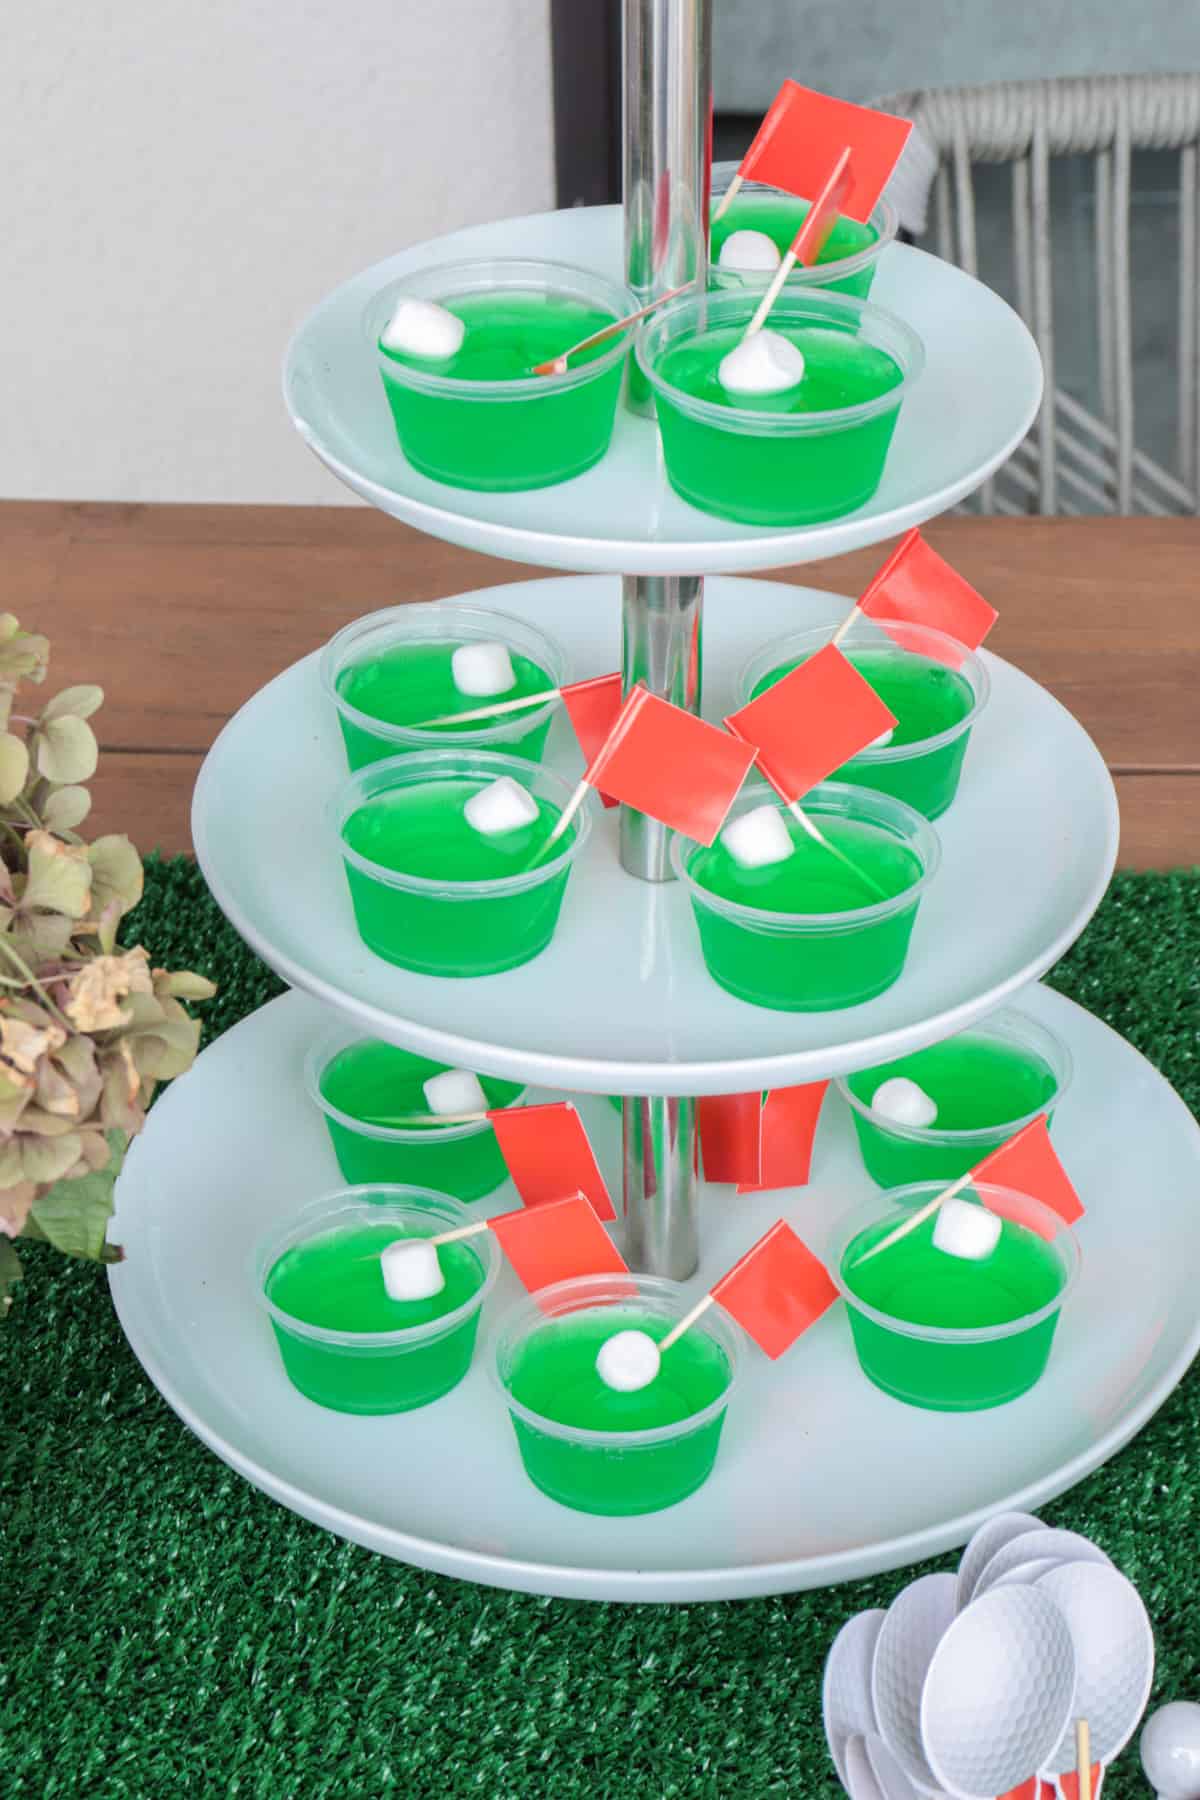 Green Jello shots with red flags and white marshmallow ball.